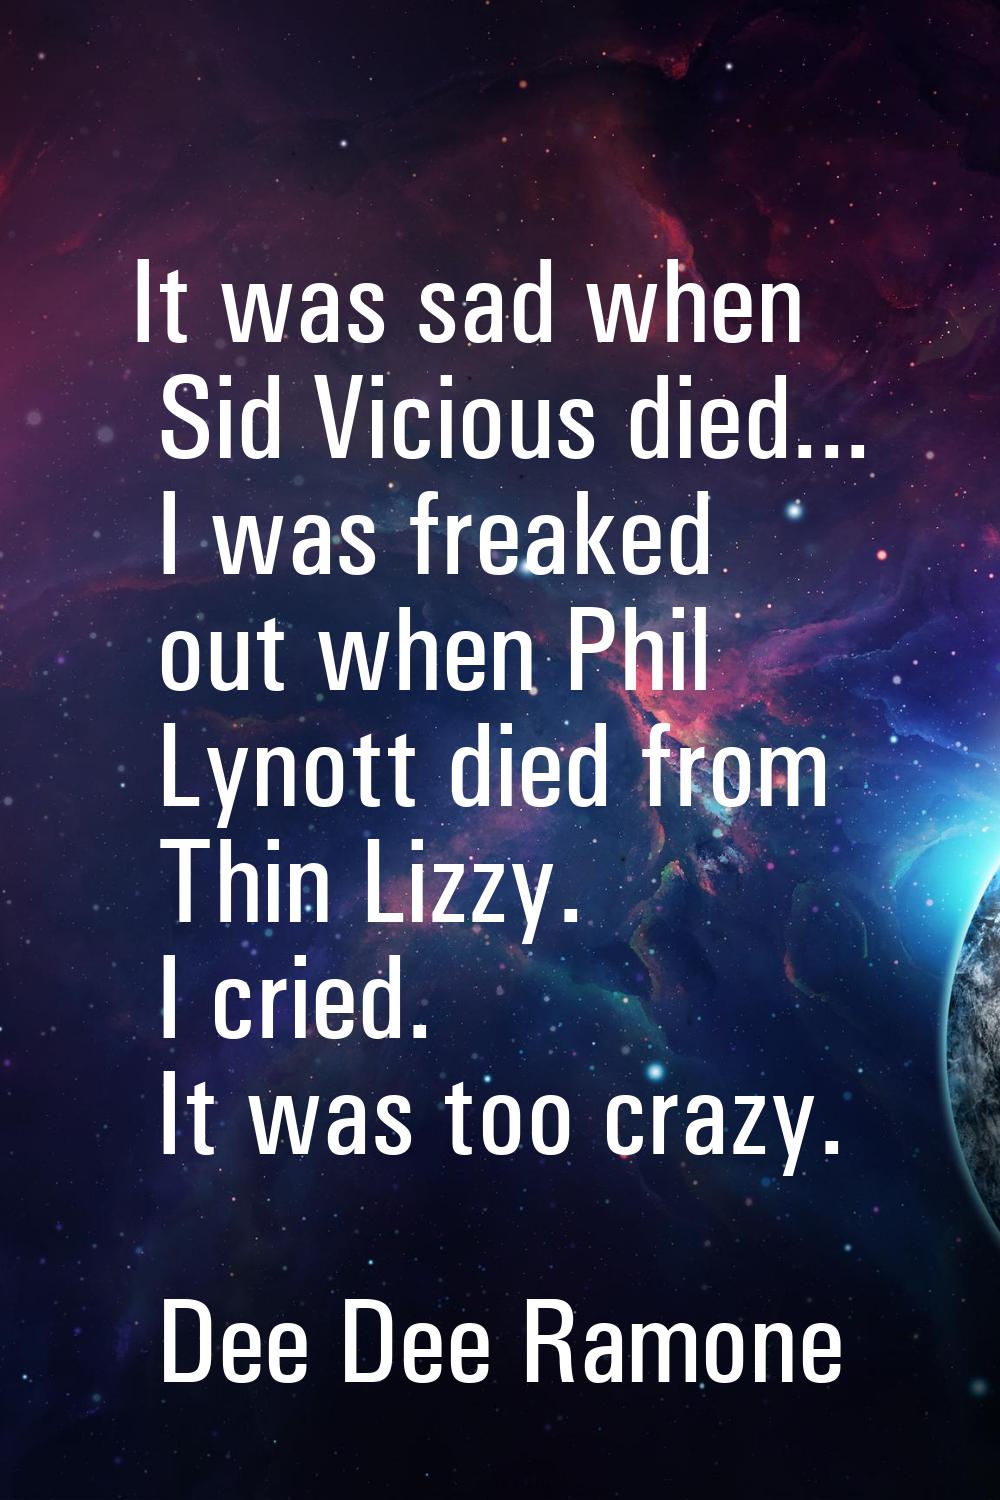 It was sad when Sid Vicious died... I was freaked out when Phil Lynott died from Thin Lizzy. I crie